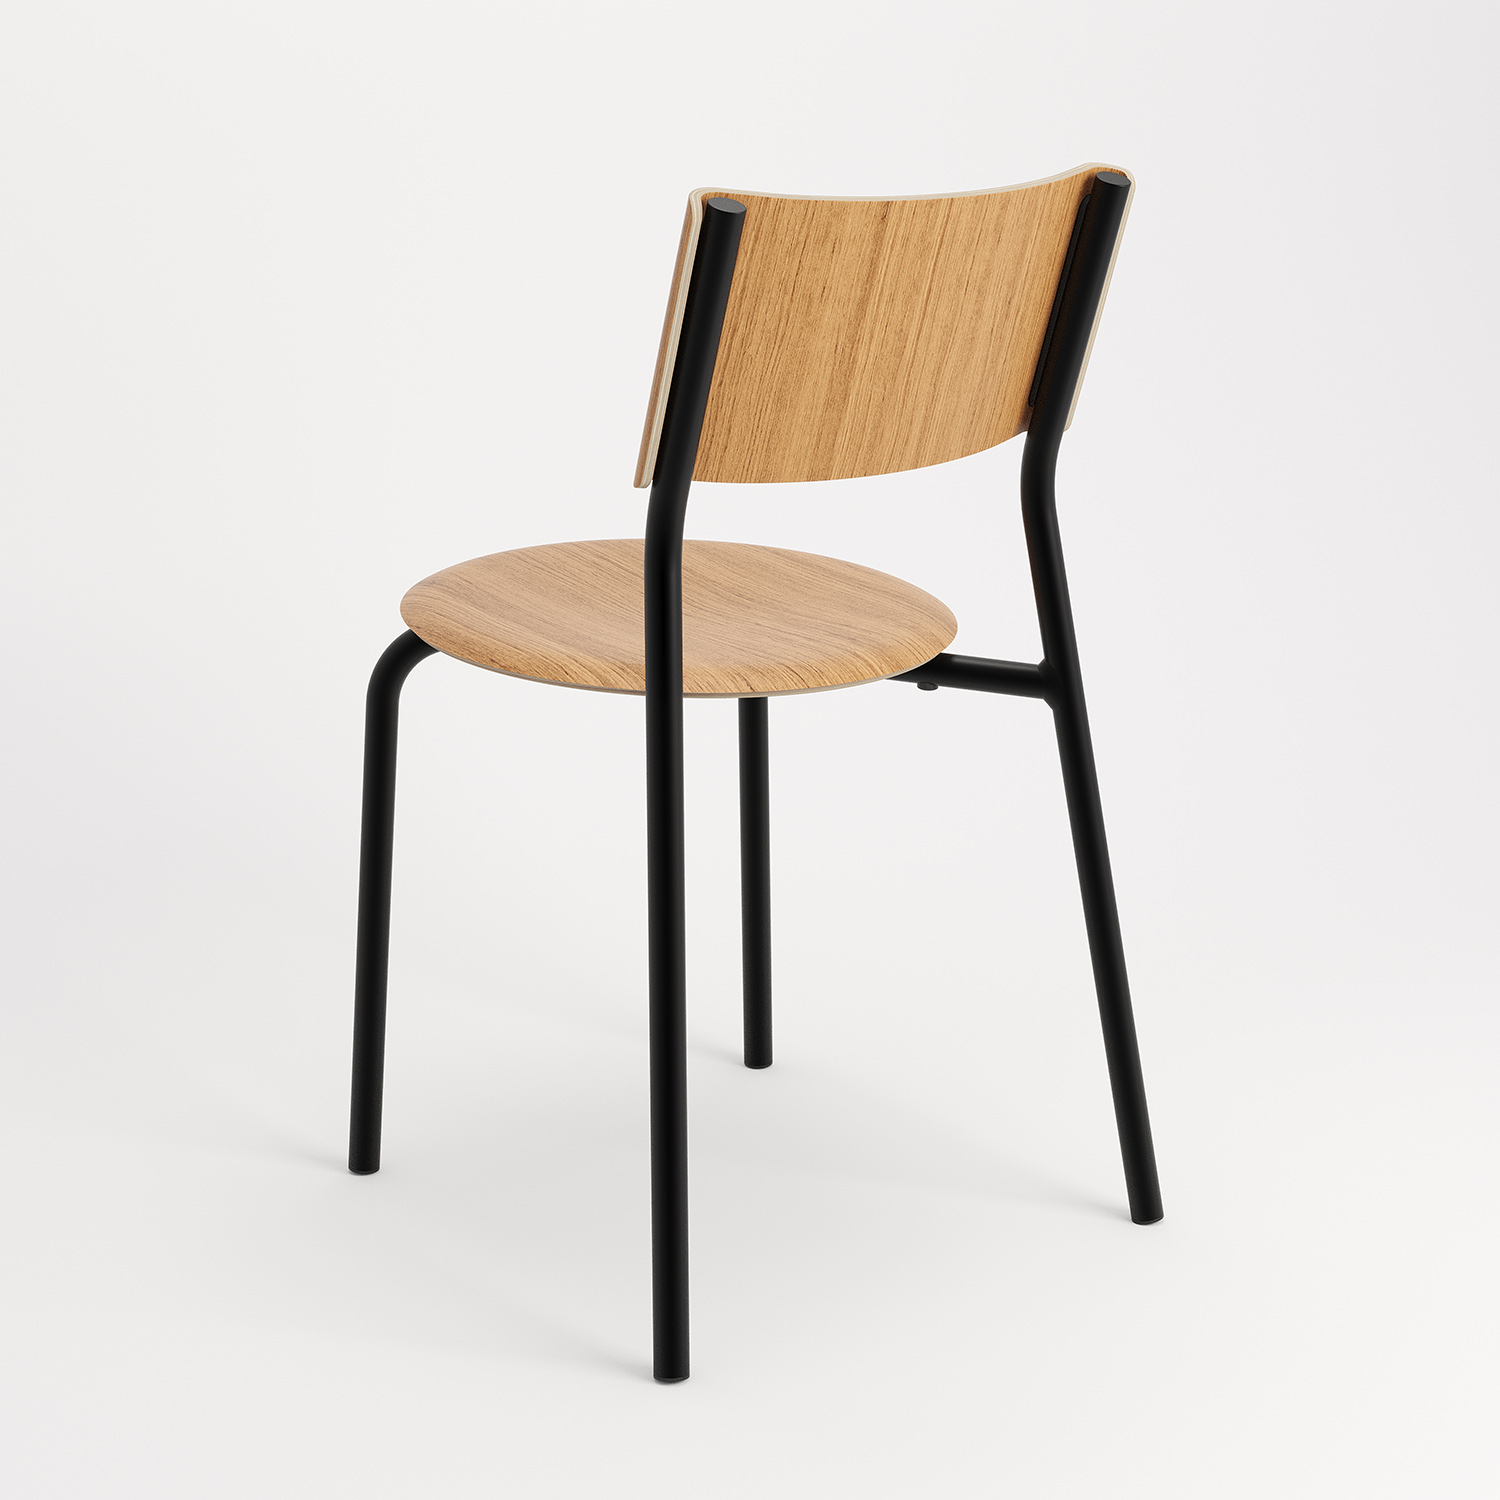 SSD chair – eco–certified wood